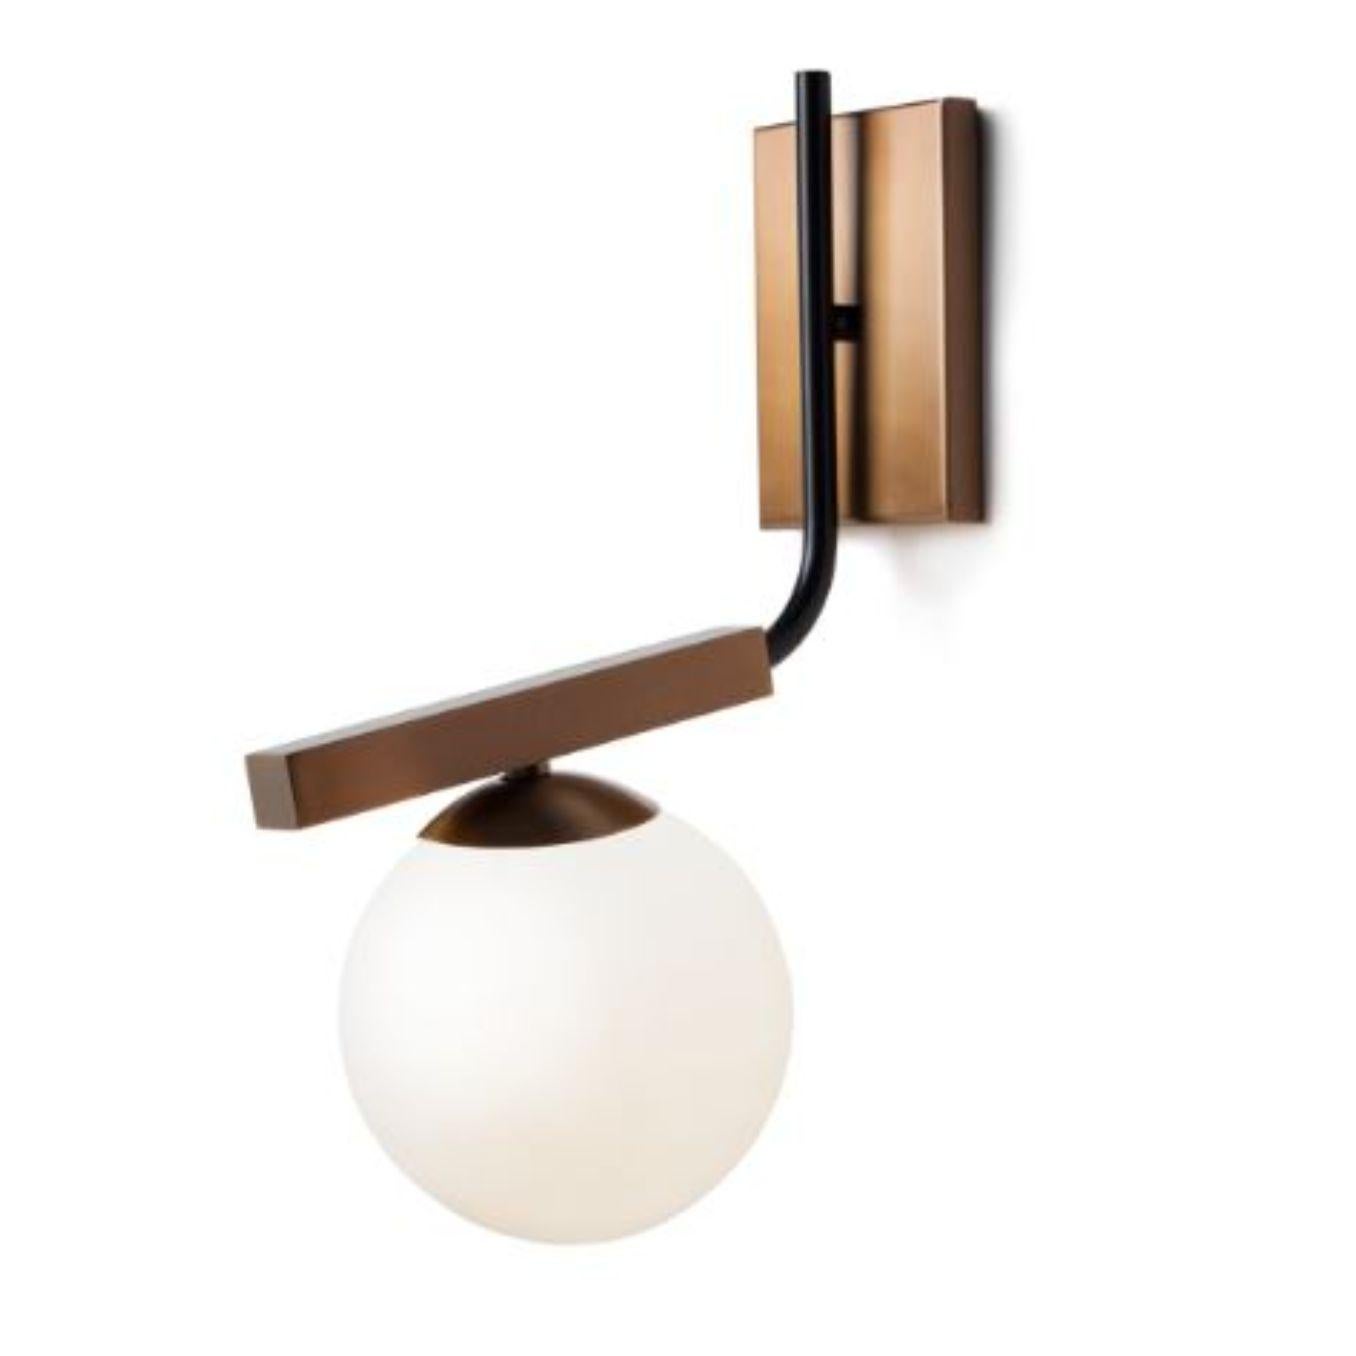 Bronze globe wall lamp by Dooq
Dimensions: W 15 x D 26 x H 40 cm
Materials: lacquered metal, polished or brushed metal, bronze.
Also available in different colours and materials. 

Information:
230V/50Hz
1 x max. G9
4W LED

120V/60Hz
1 x max. G9
4W